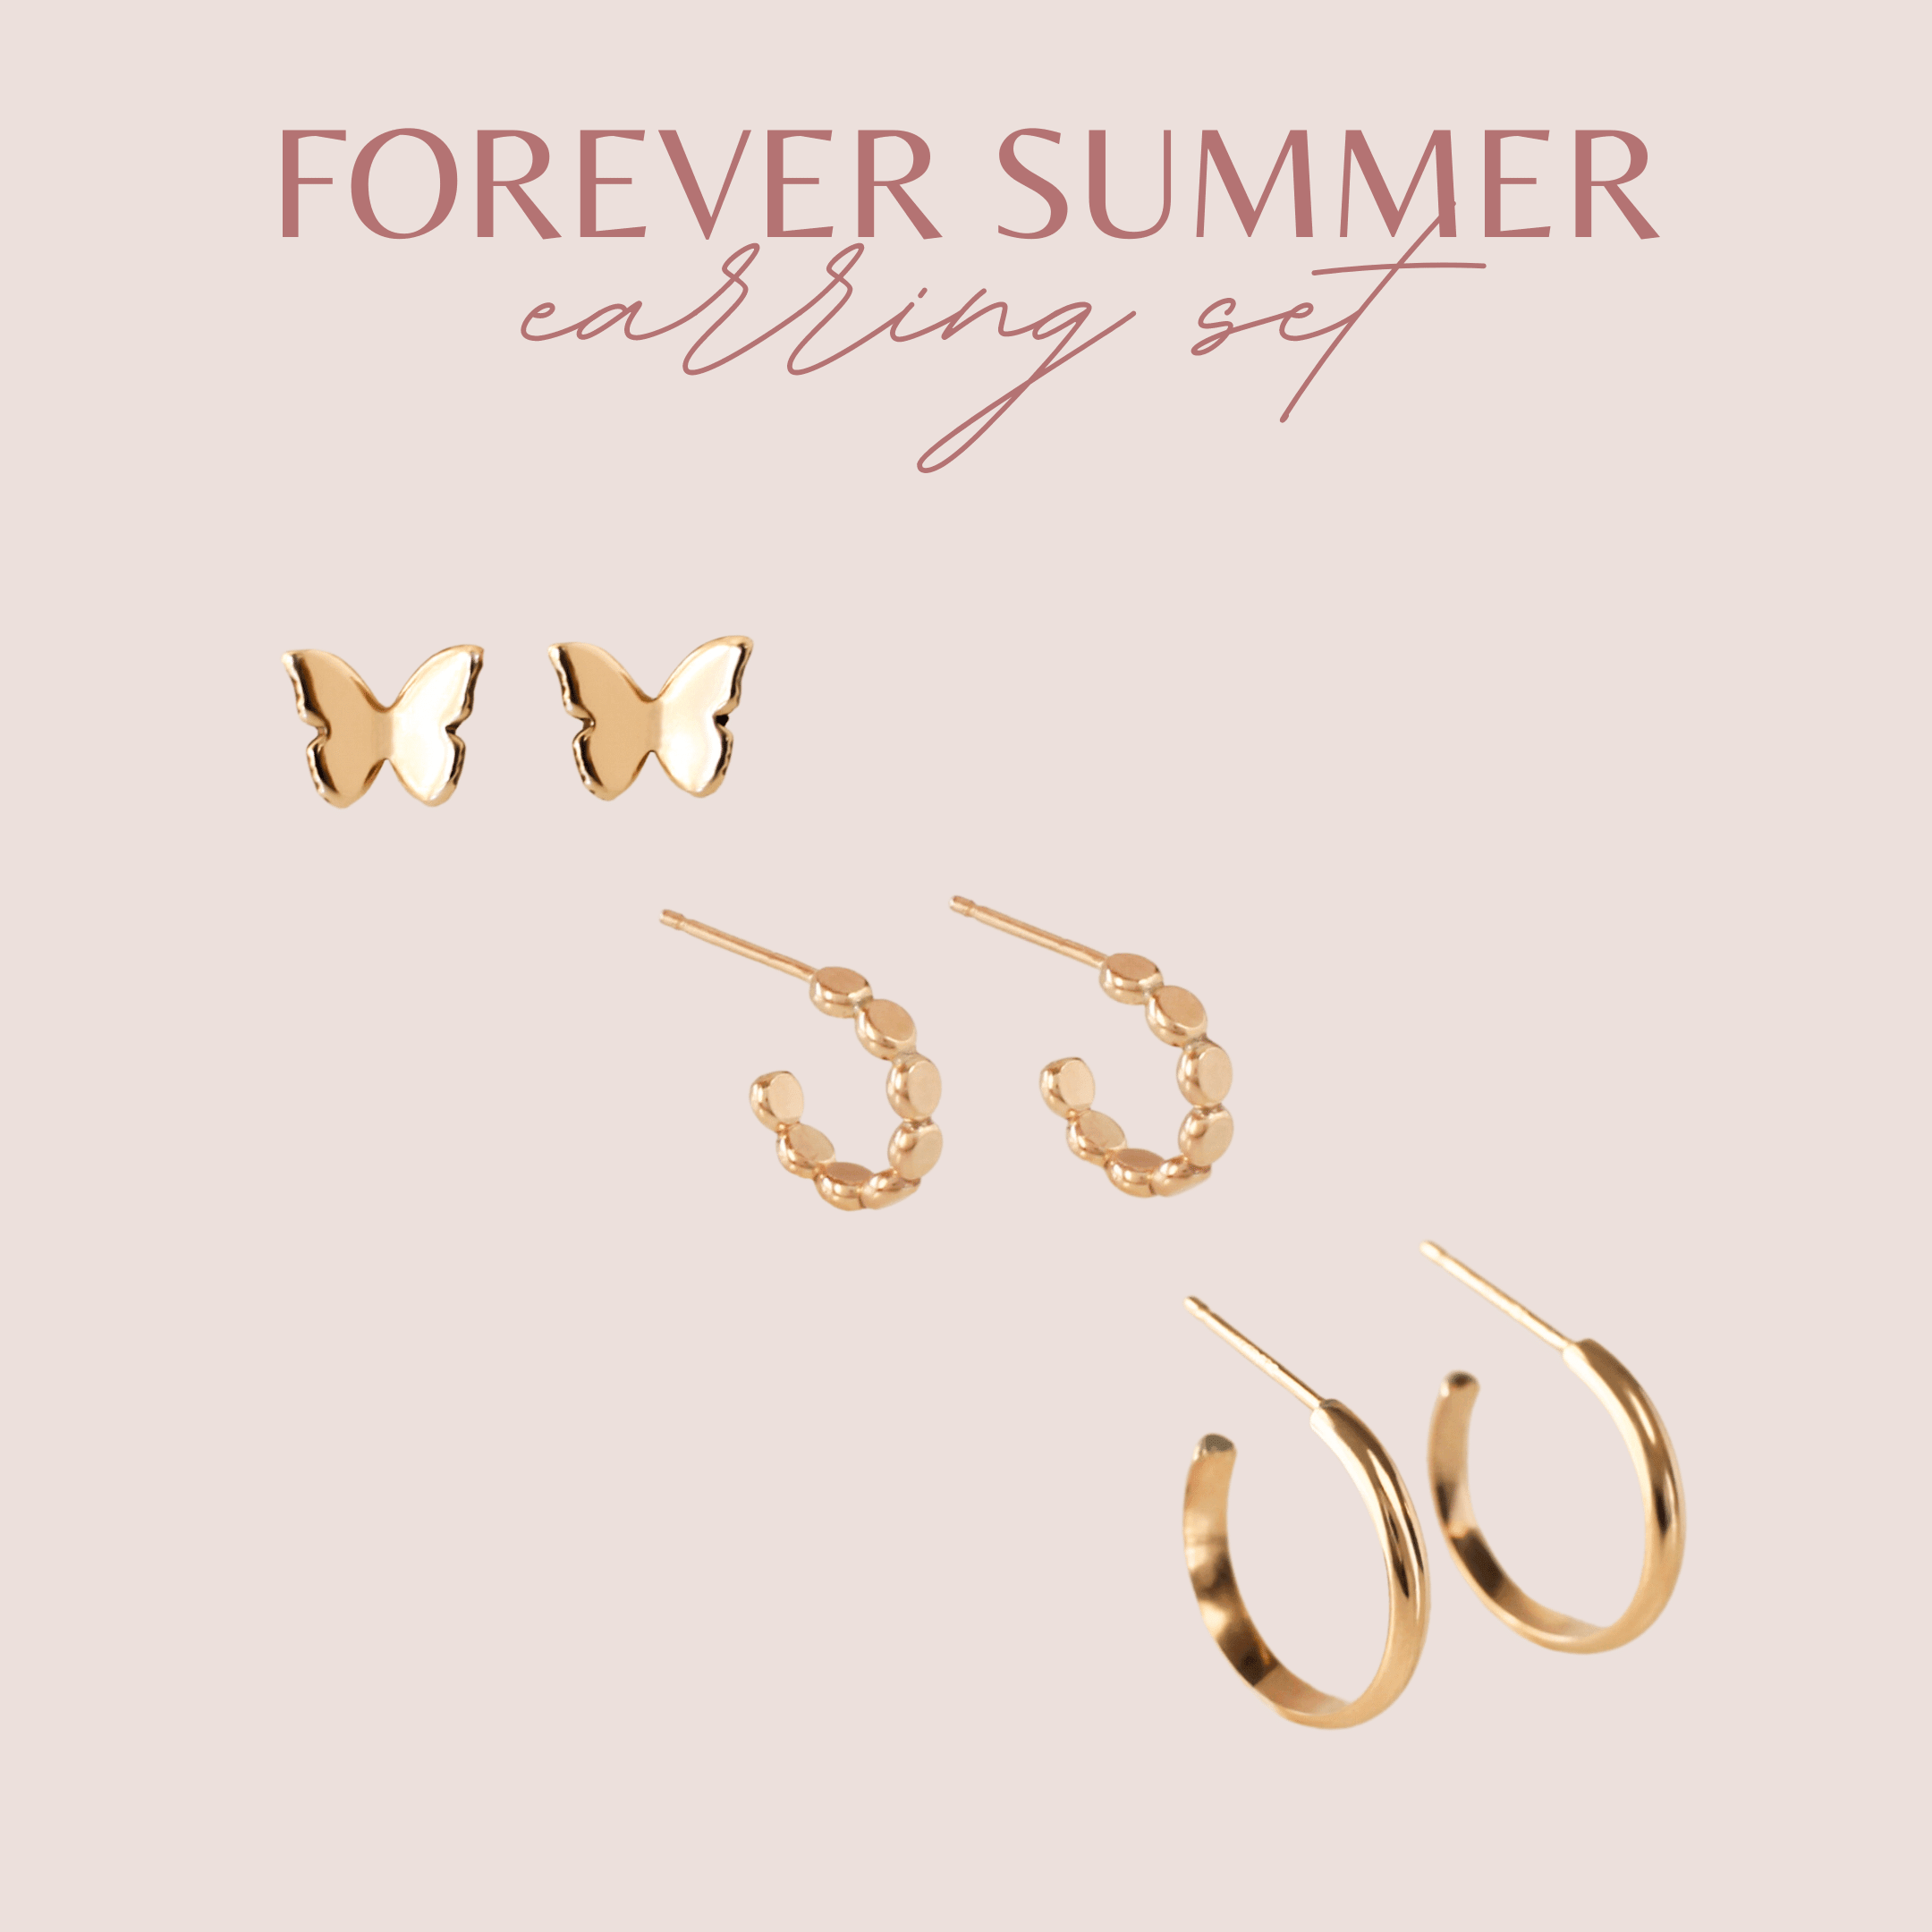 Essential Summer Earring Set - Nolia Jewelry - Meaningful + Sustainably Handcrafted Jewelry